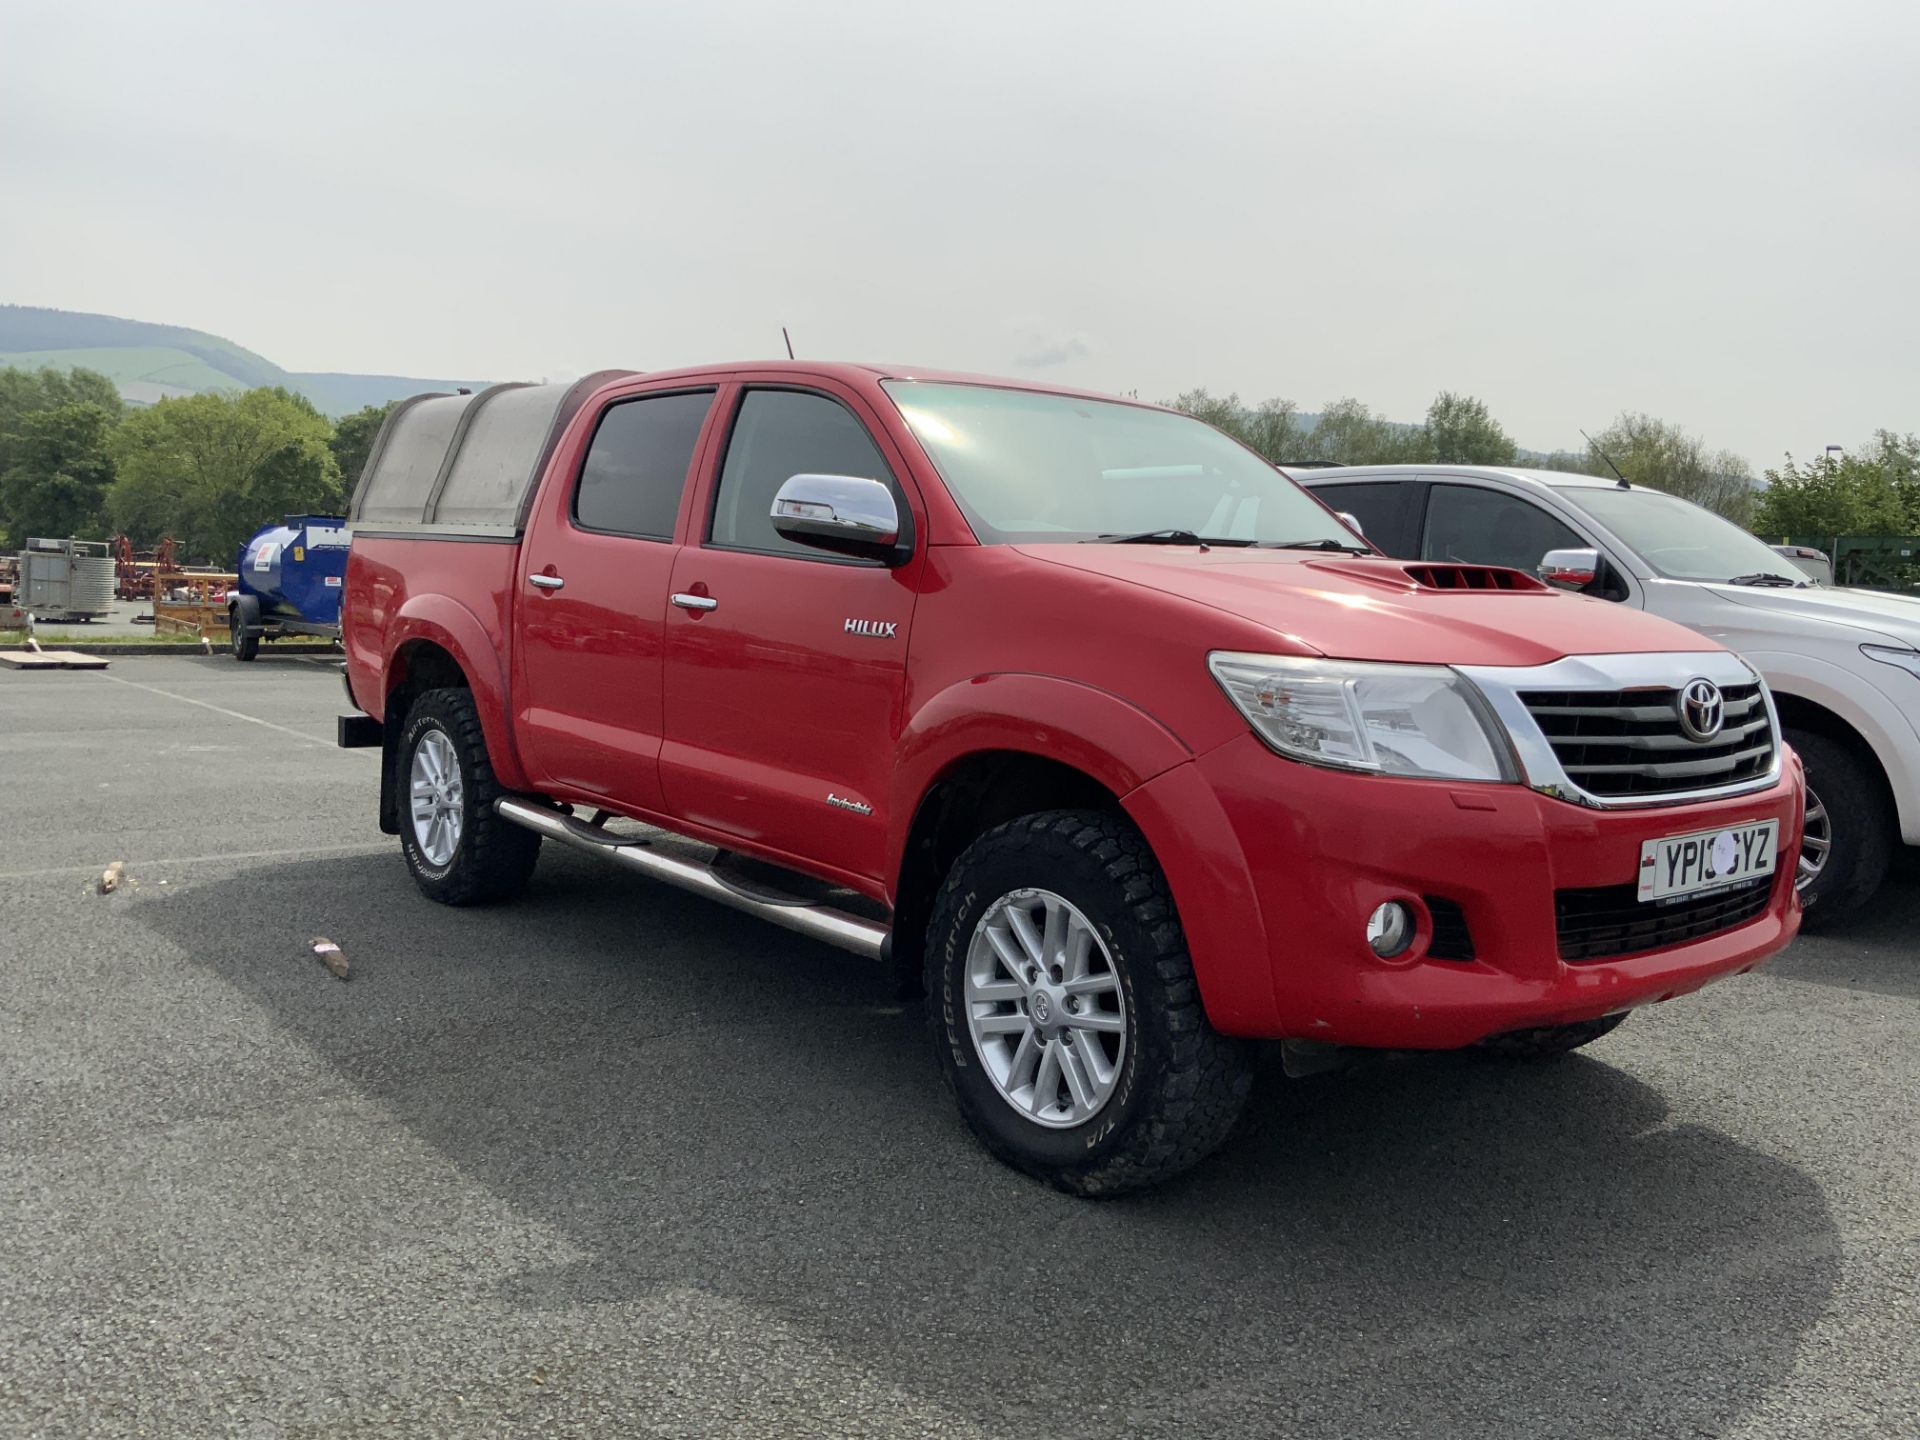 TOYOTA HILUX 3.0 INVINCIBLE PICK UP. MAN - Image 6 of 6